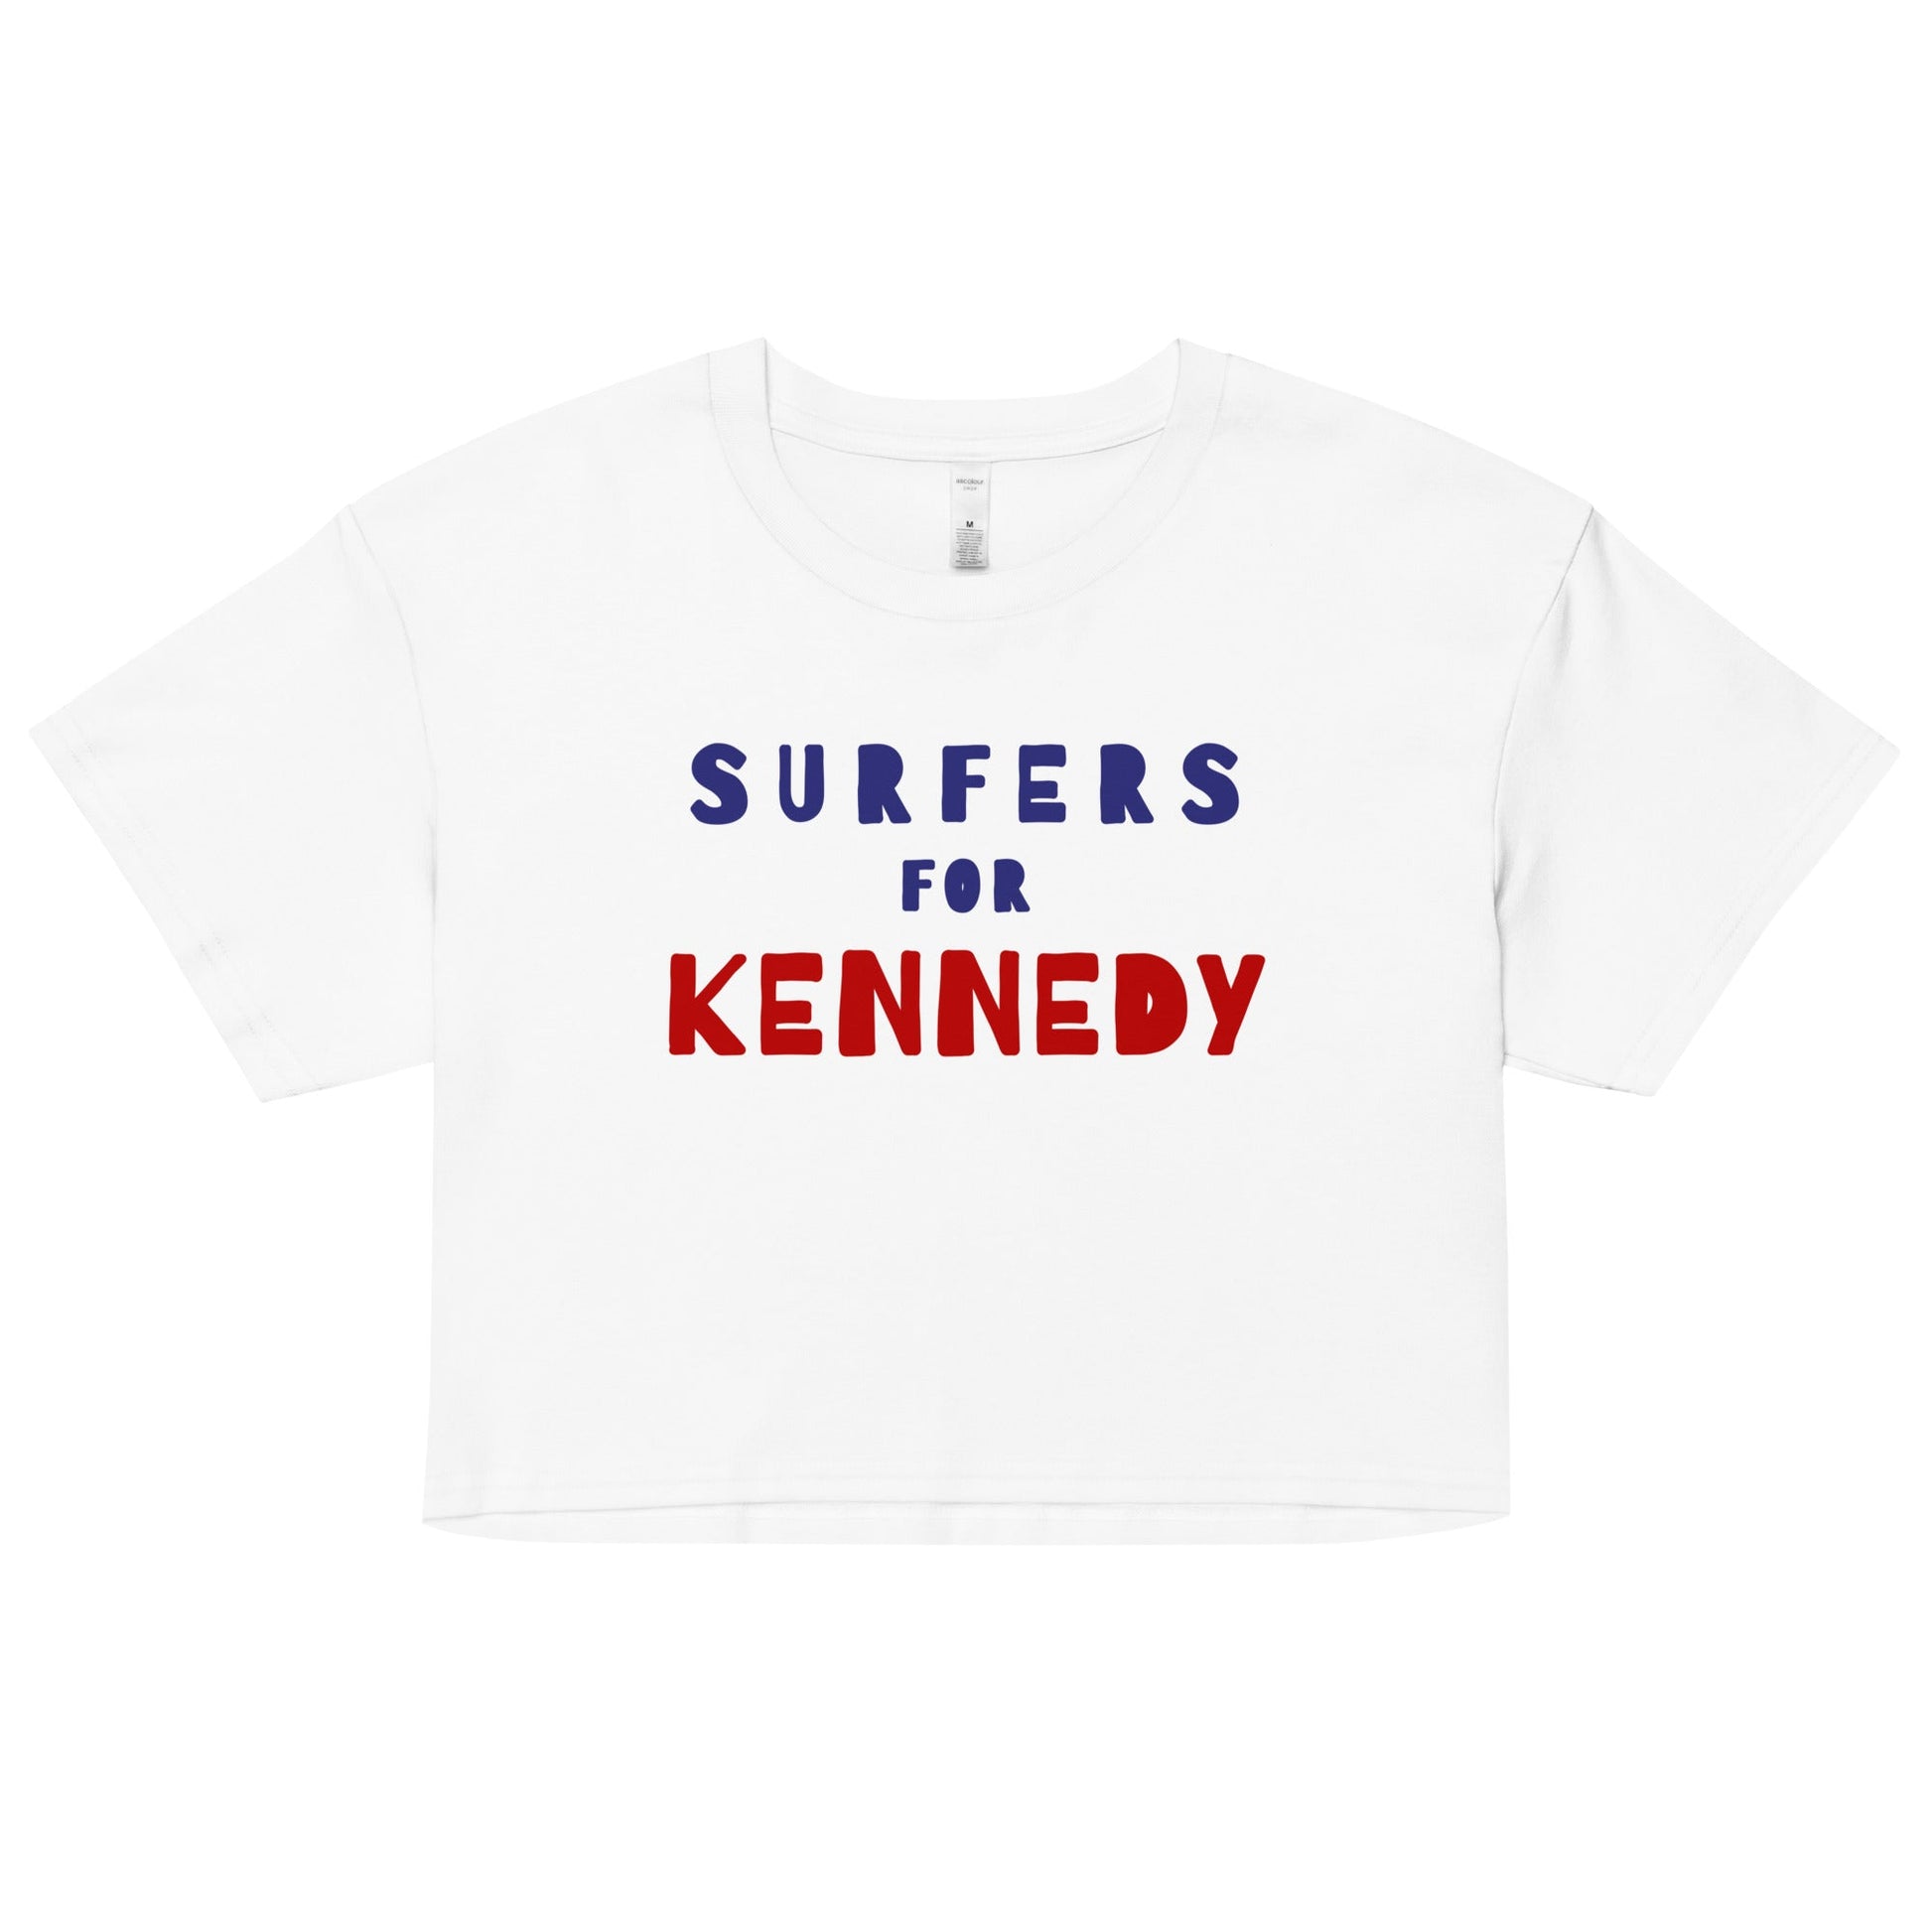 Surfers for Kennedy Women’s Crop Top - TEAM KENNEDY. All rights reserved